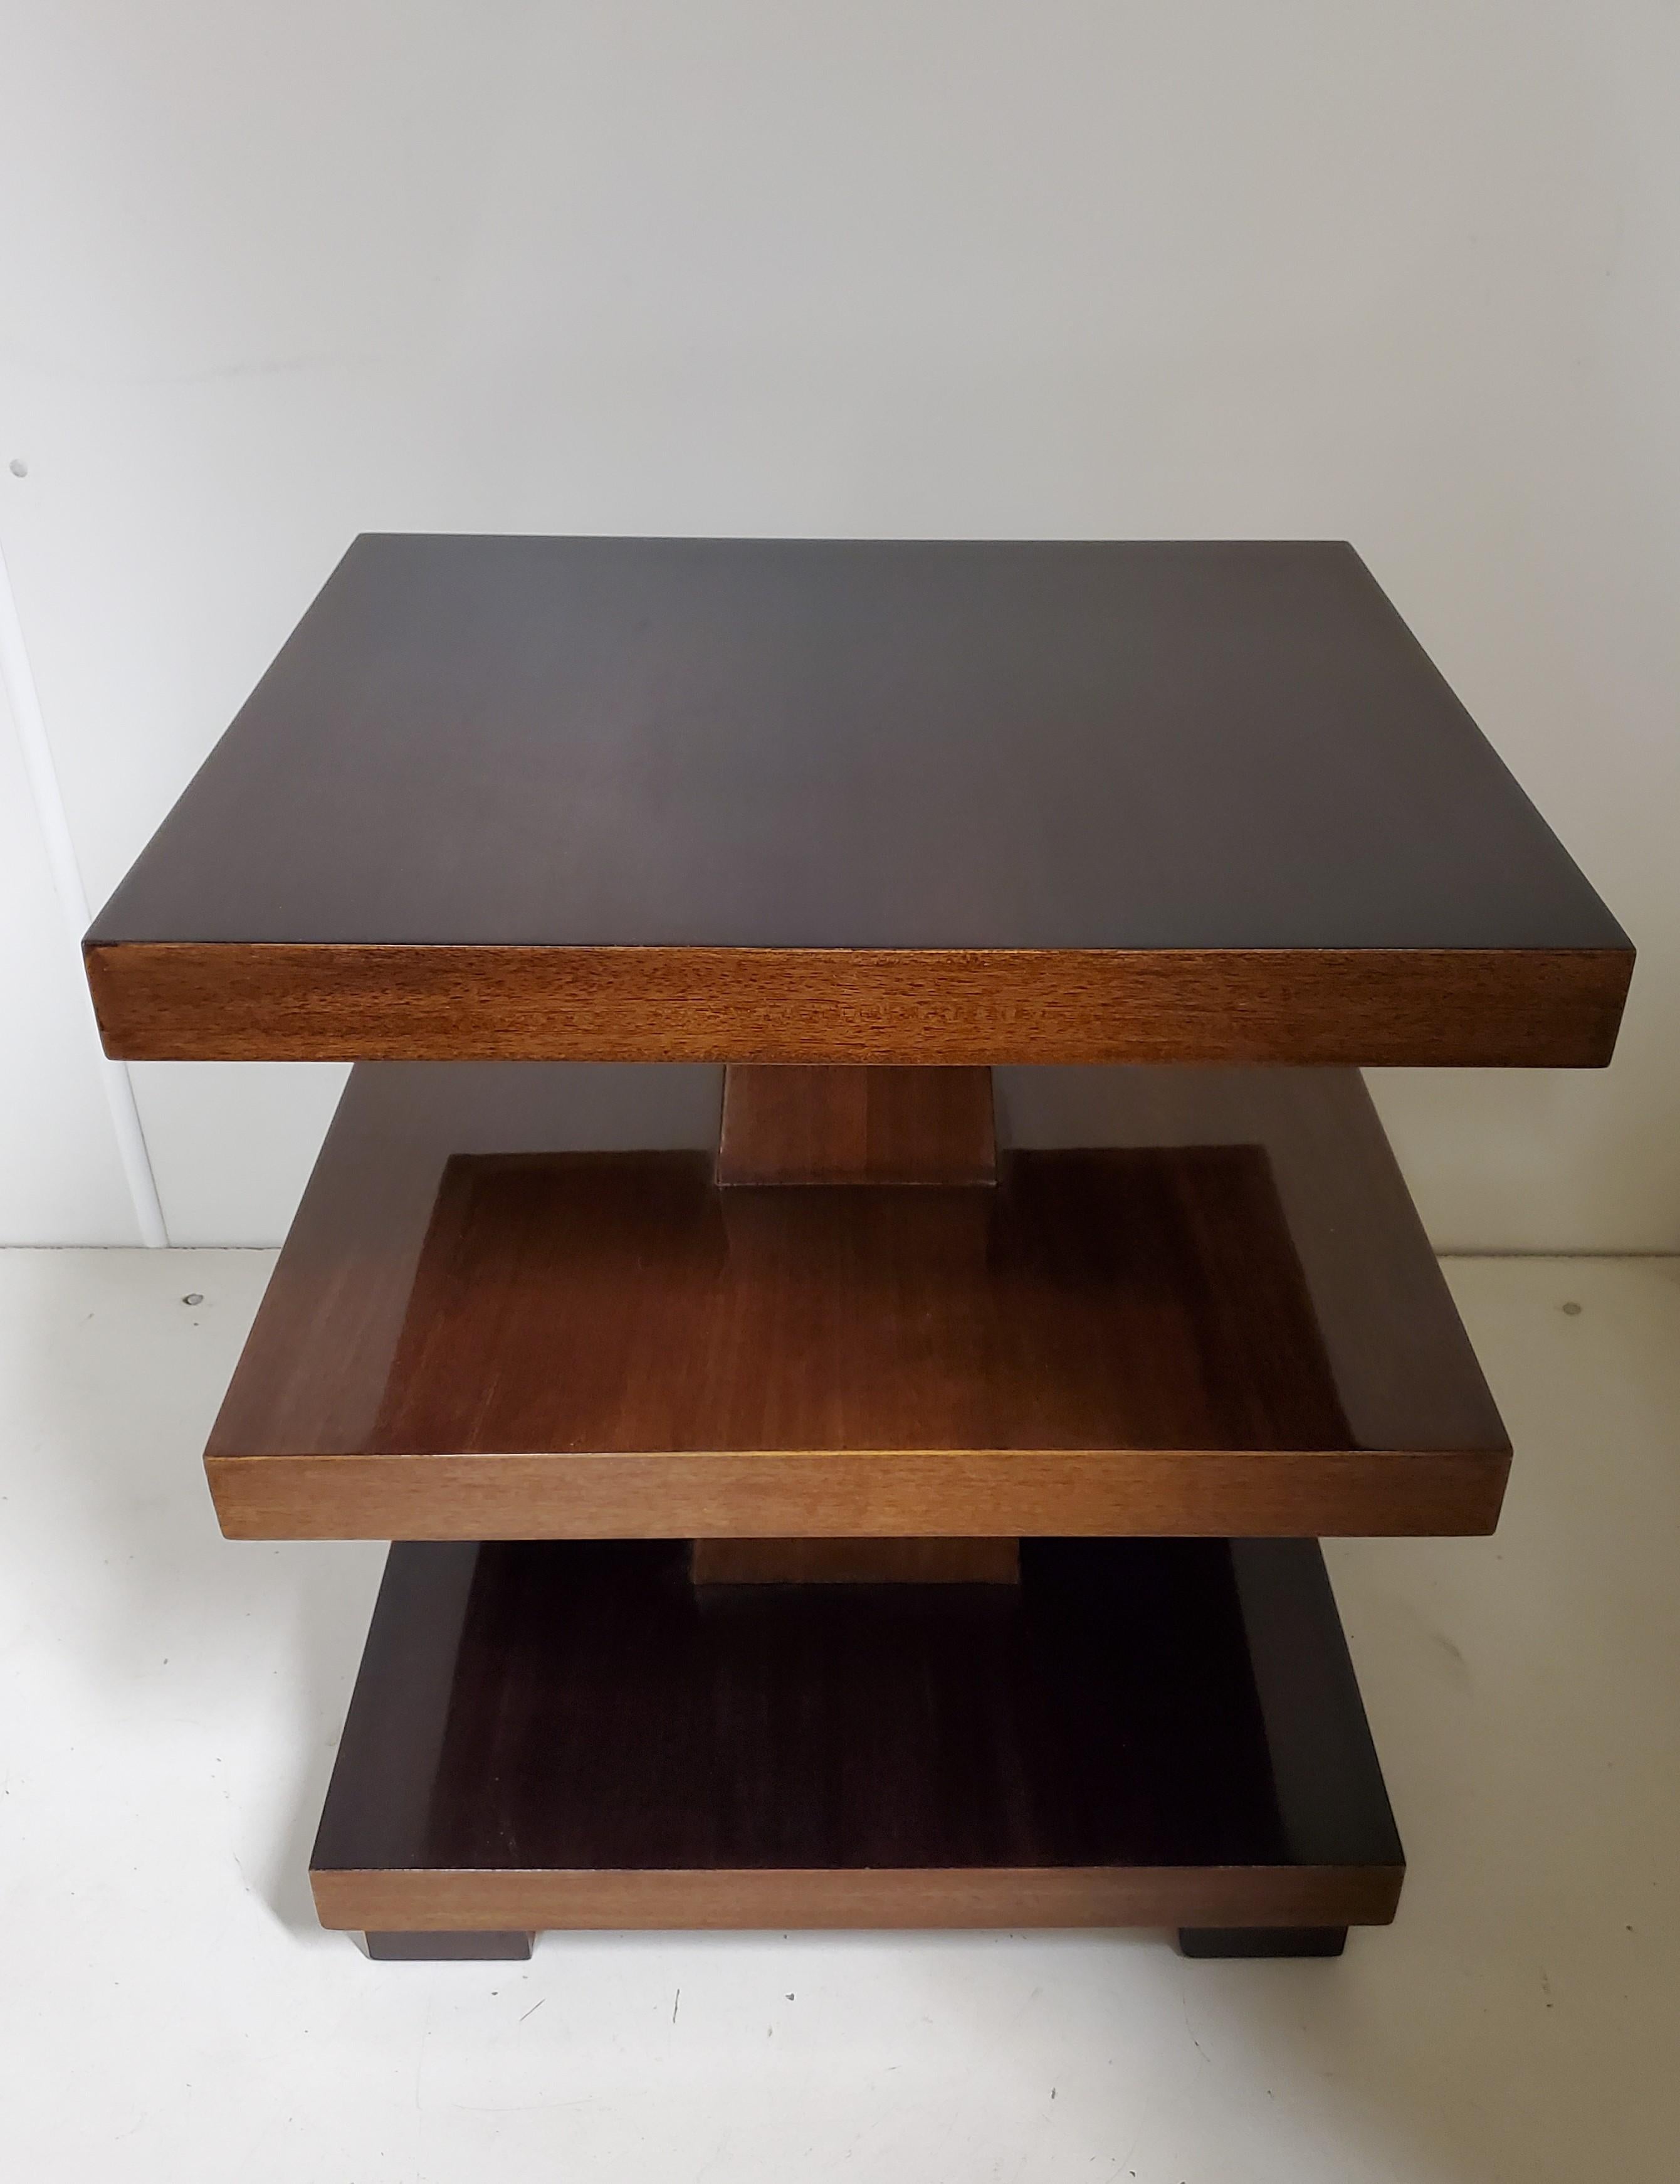 An elegant and imposing highly sculptural, Art Deco rectangular three tiered tables of cubist design in a deep cognac /dark amber colored mahogany with central shaft dissecting the shelves and the whole raised on cube feet.
The angular form